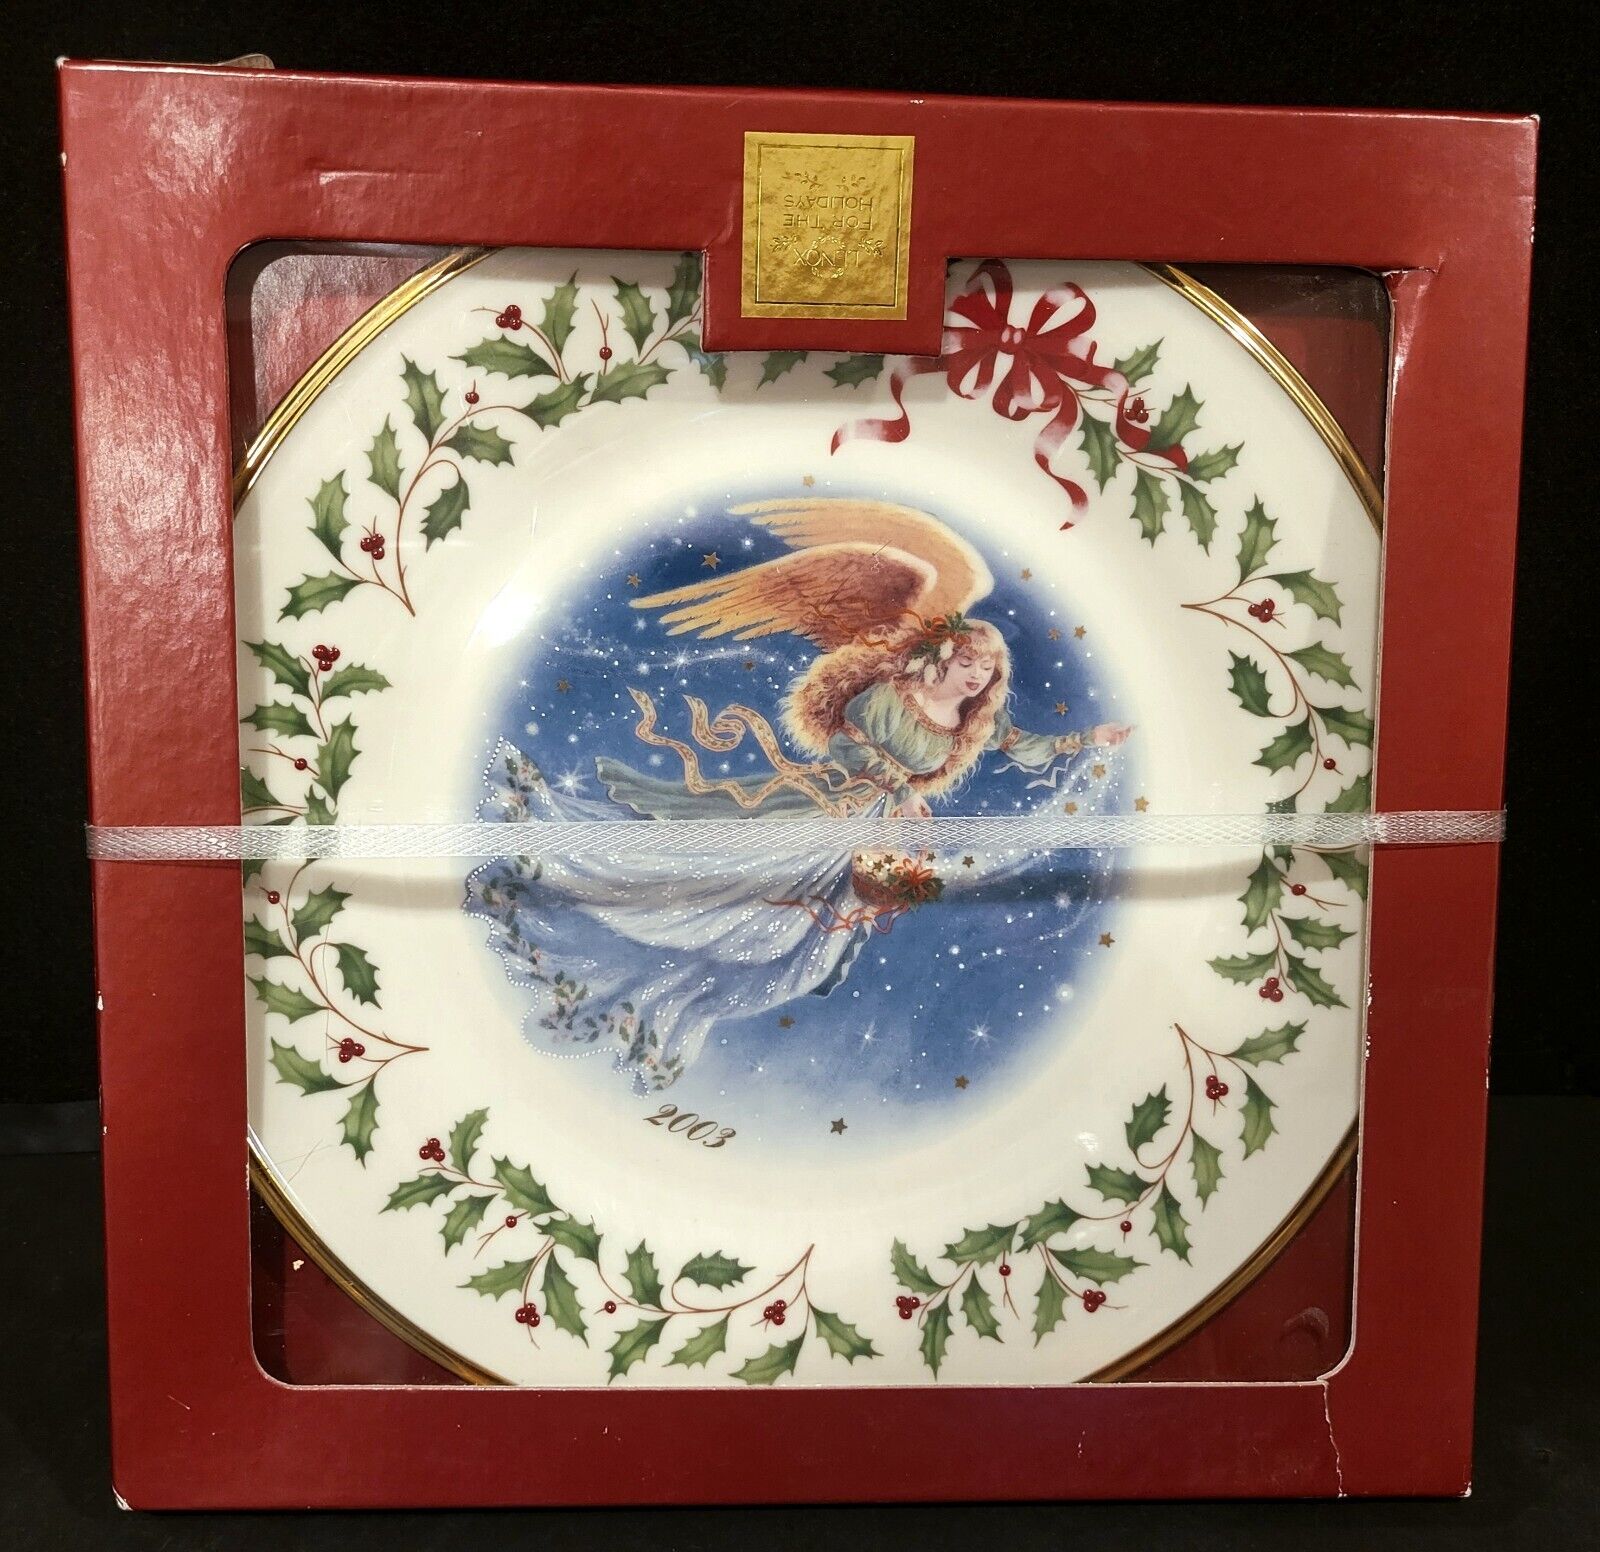 LENOX ANNUAL HOLIDAY COLLECTOR PLATE 2003 ANGEL 13th IN SERIES 10 3/4